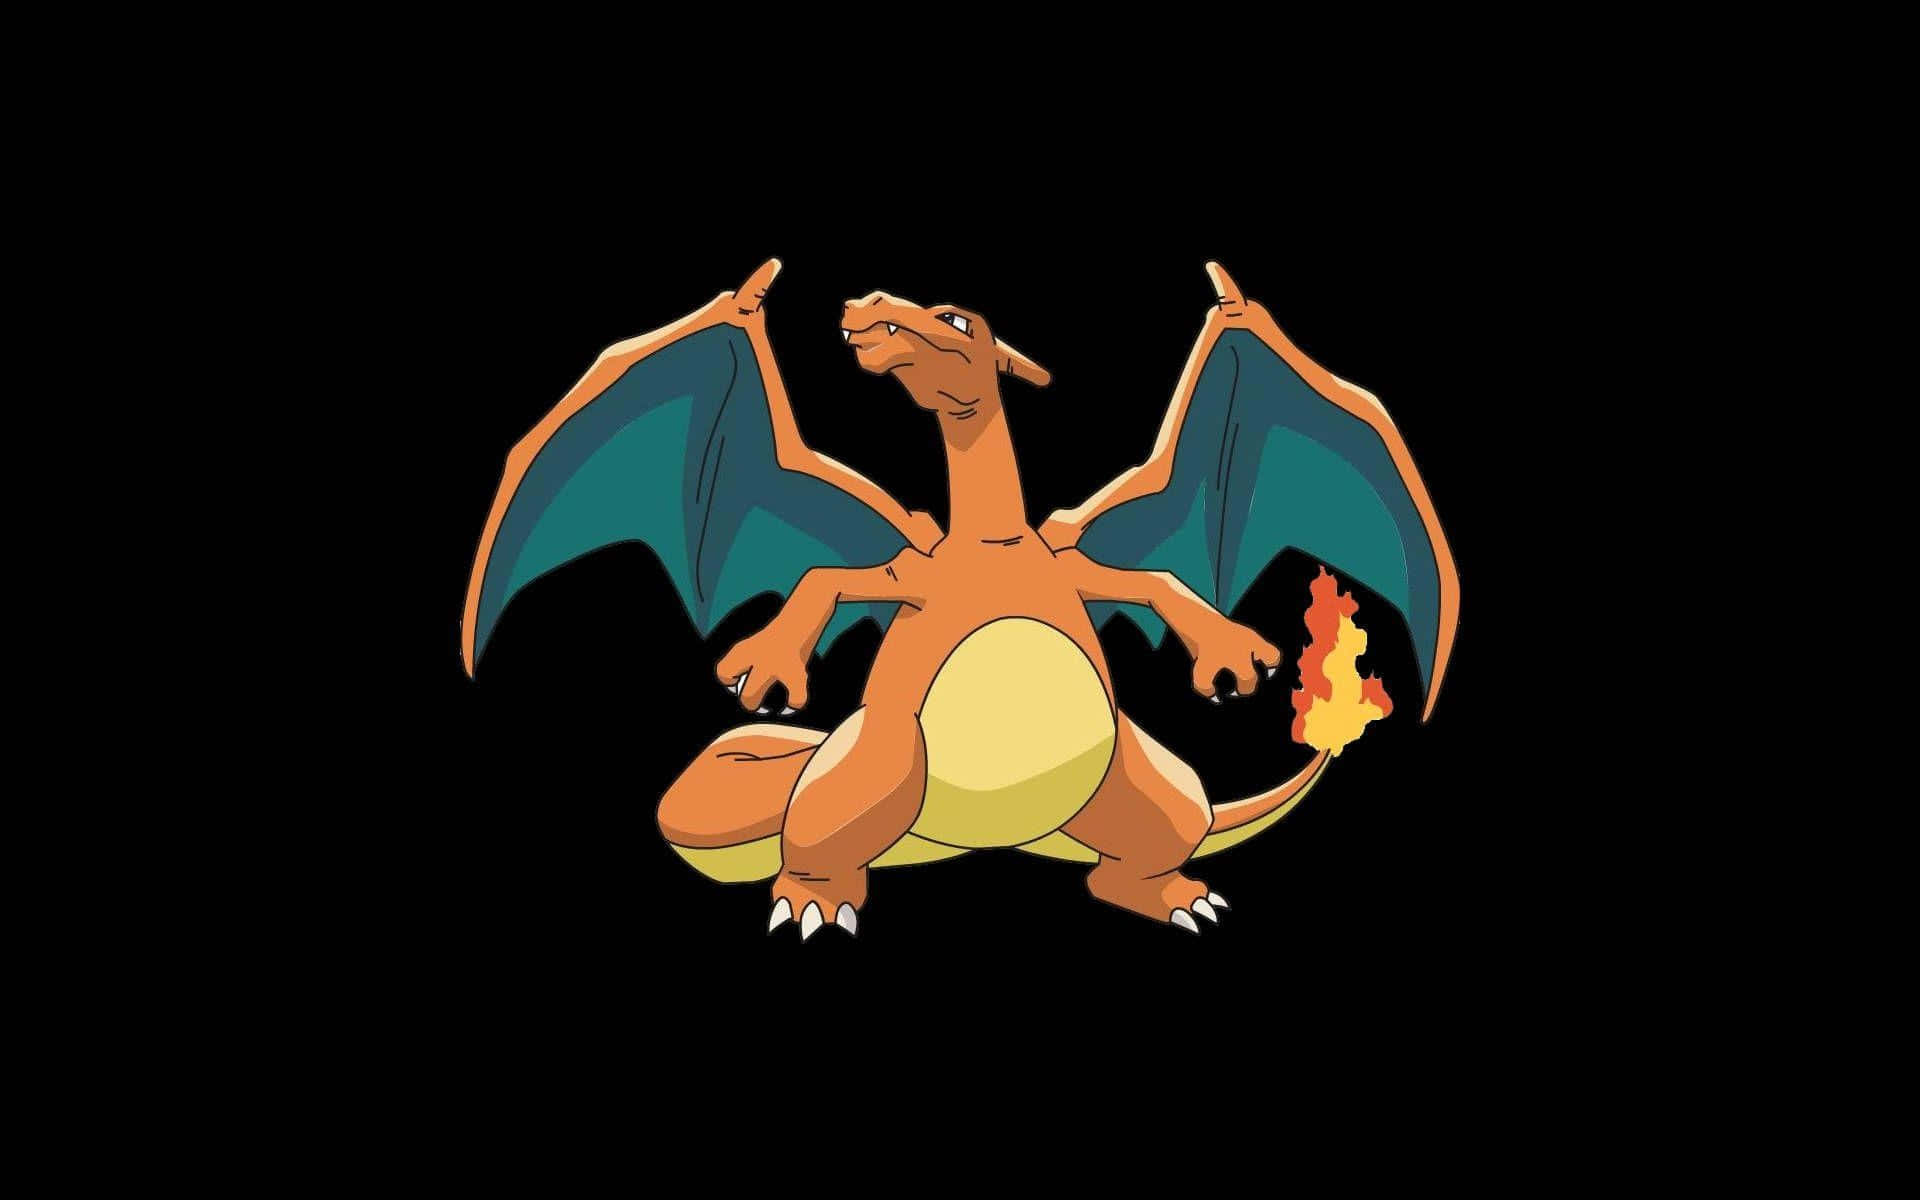 "Take on the World with Epic Charizard" Wallpaper